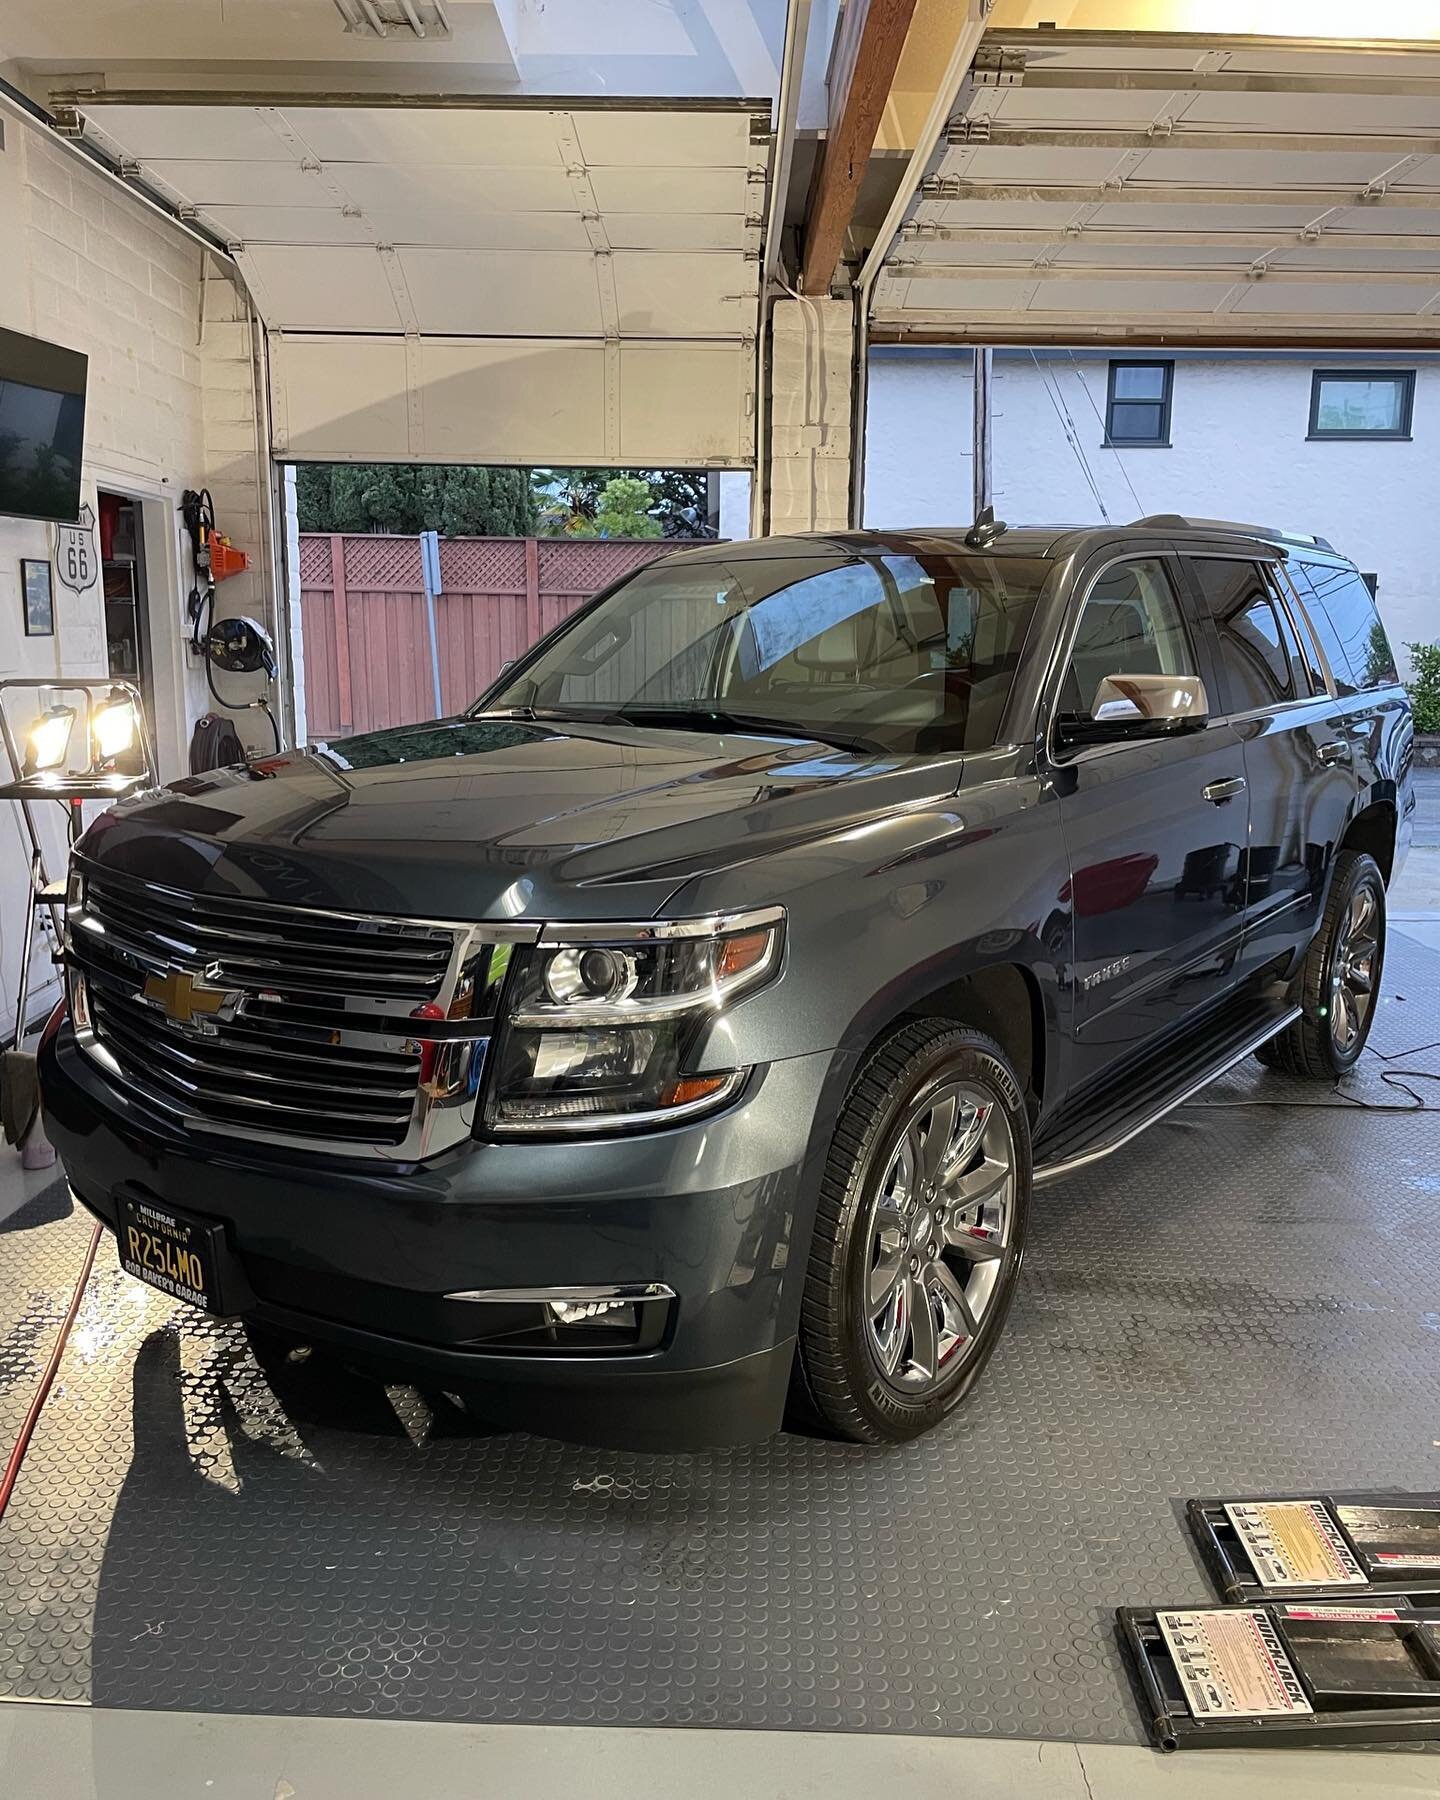 Routine interior and exterior detail on this Chevy Tahoe!